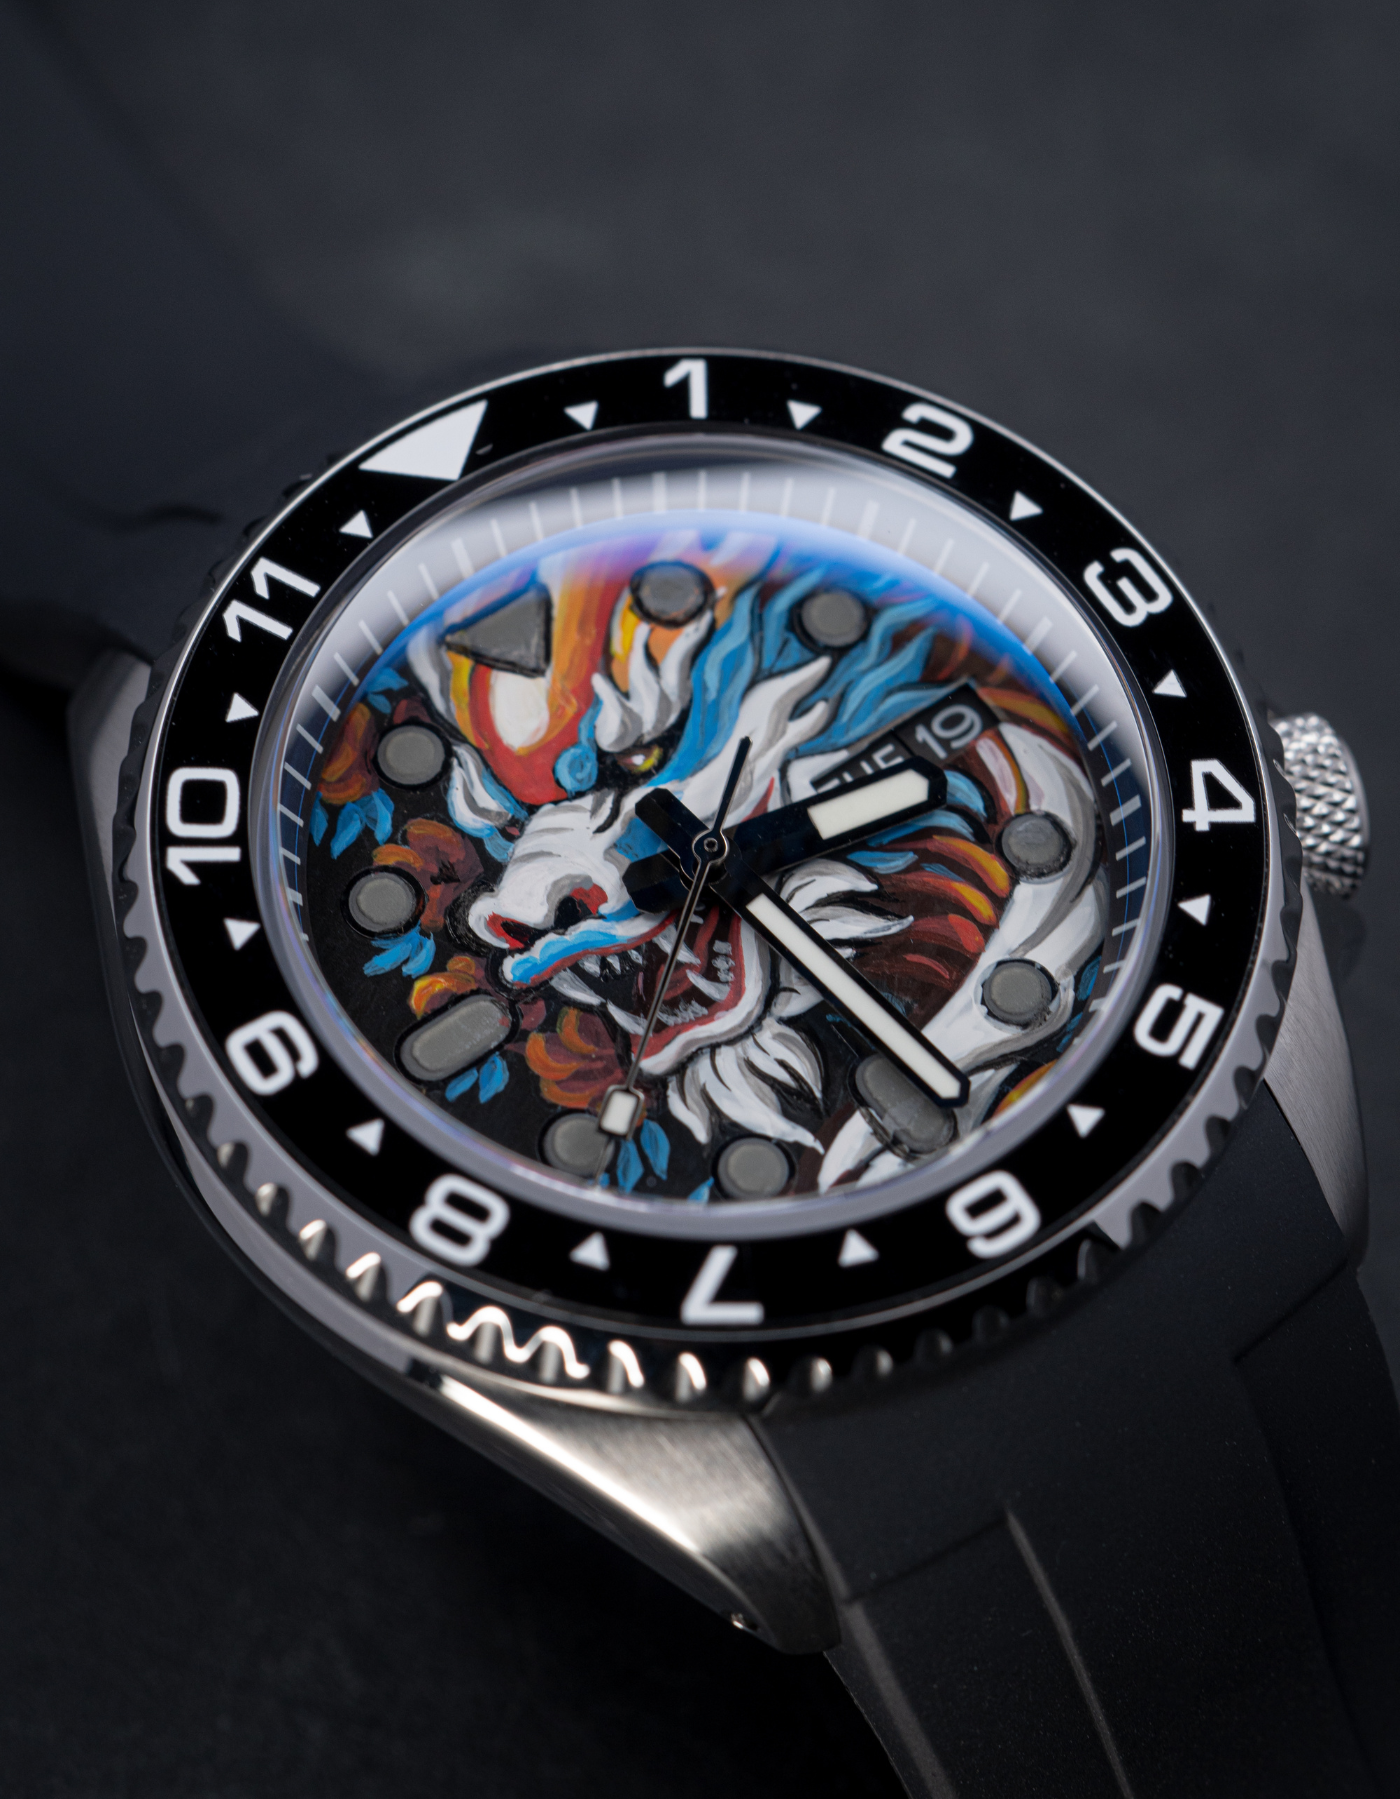 SM 01-27R - The Draconic Mastery Limited Edition